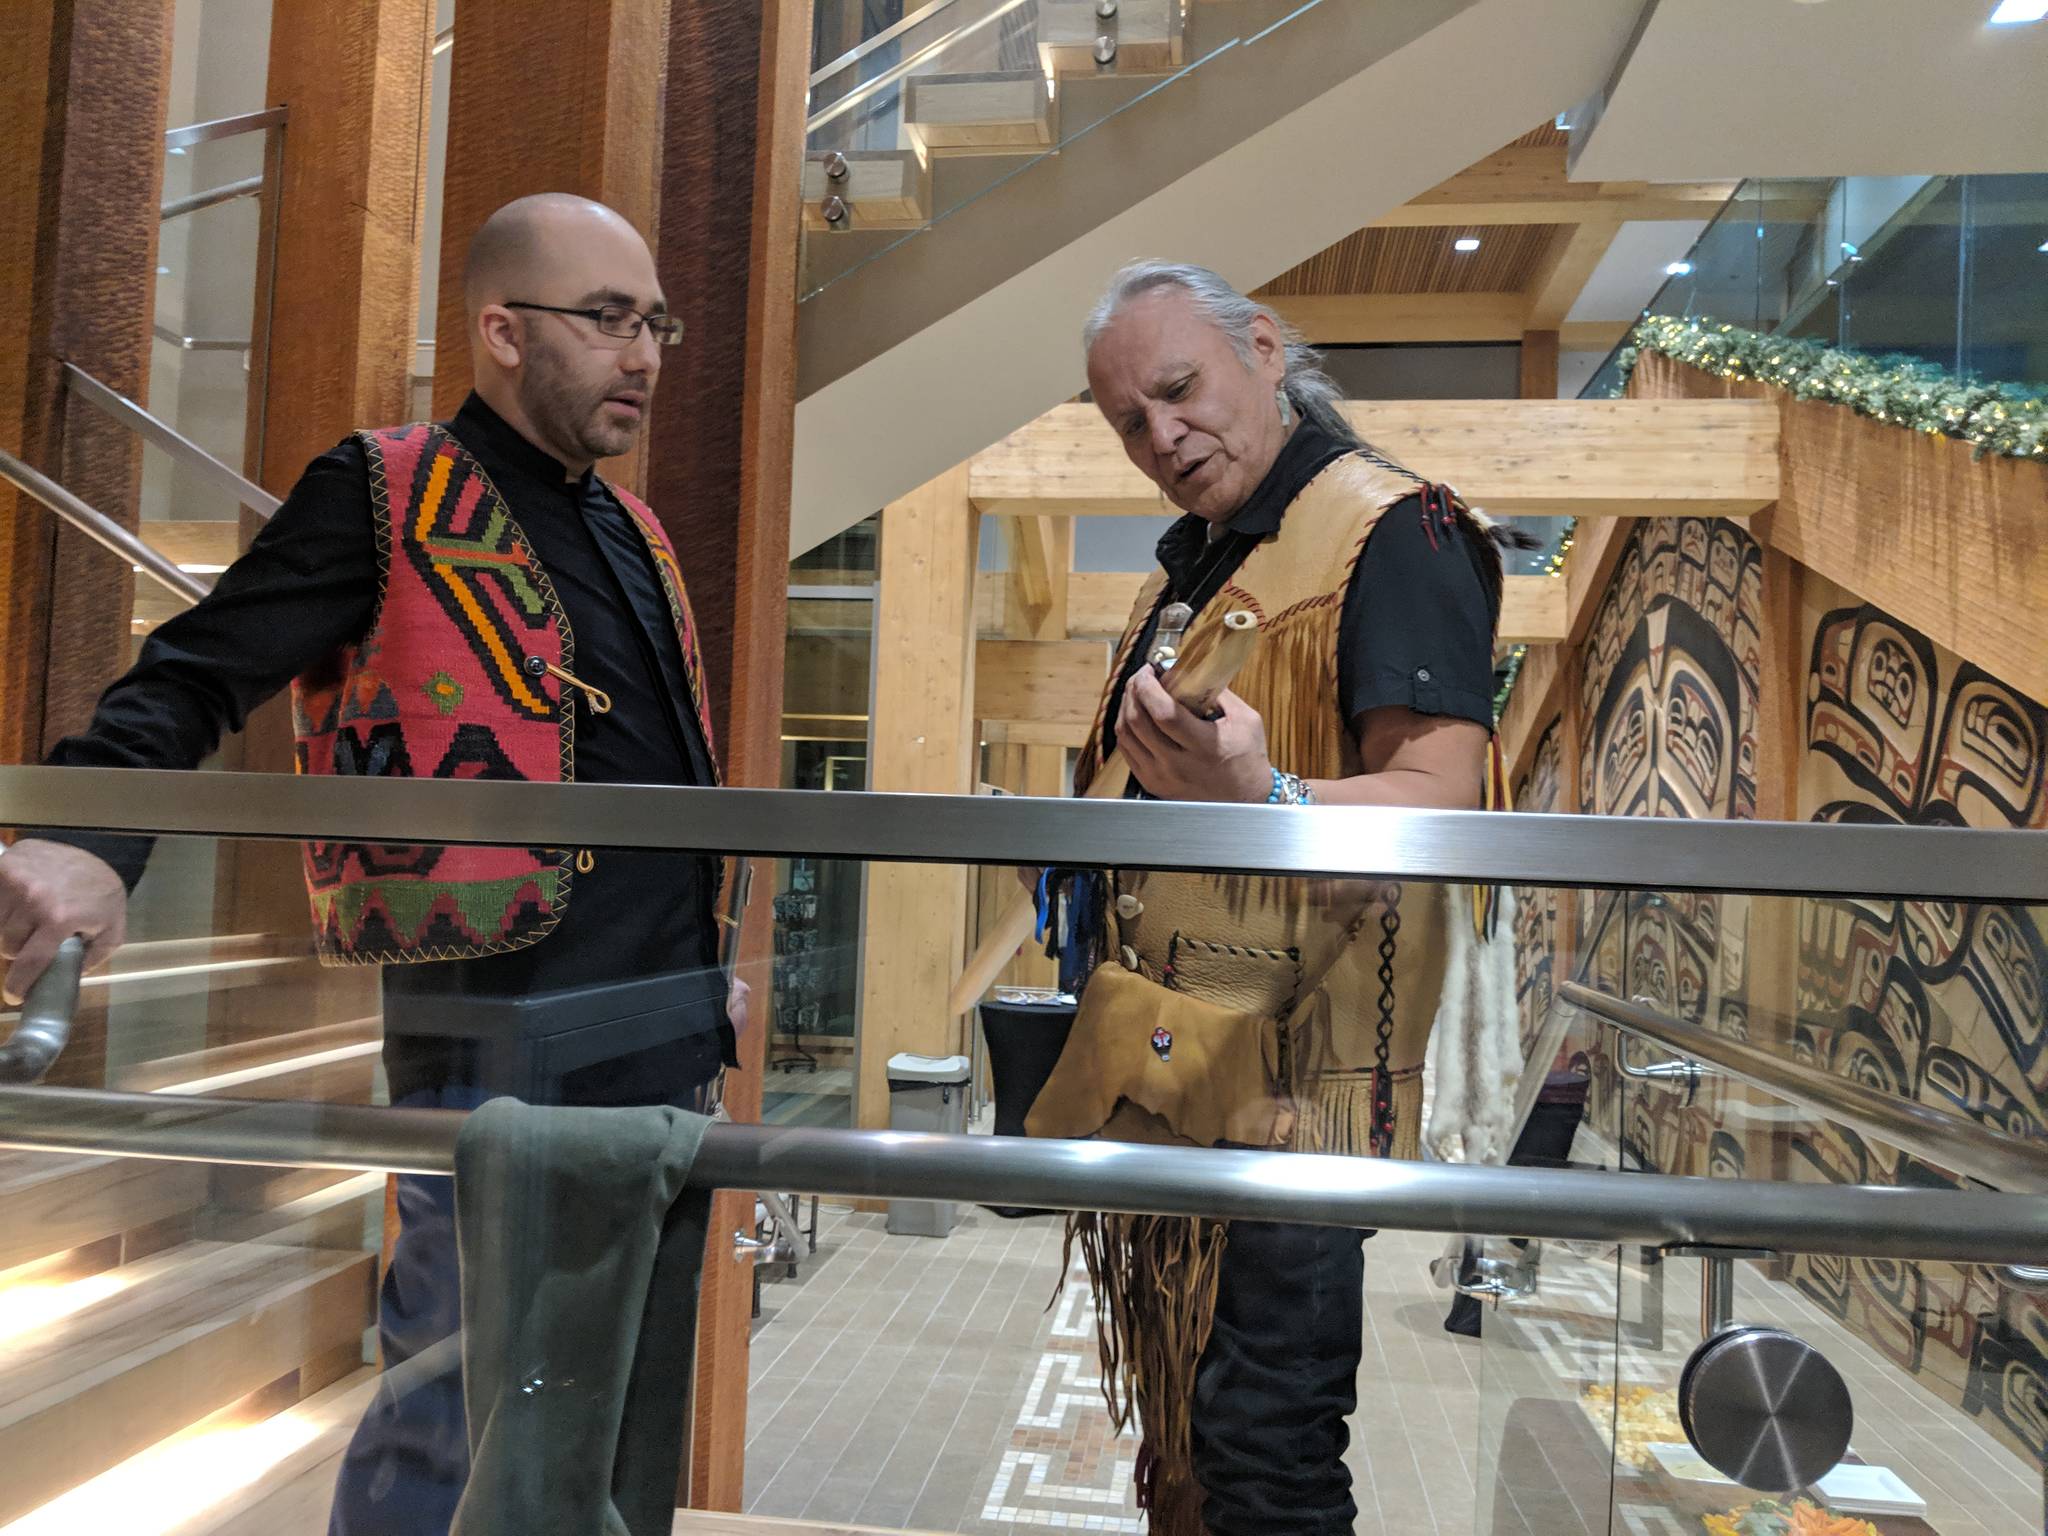 Tlingit flautist George Montero and Armenian flautist Tigran Arakelyan talk in the Walter Soboleff building before heading to the clan house that gave Shuká Hít Series: Flutes From Around the World concert its name, Saturday, Jan. 19, 2019. (Ben Hohenstatt | Capital City Weekly)